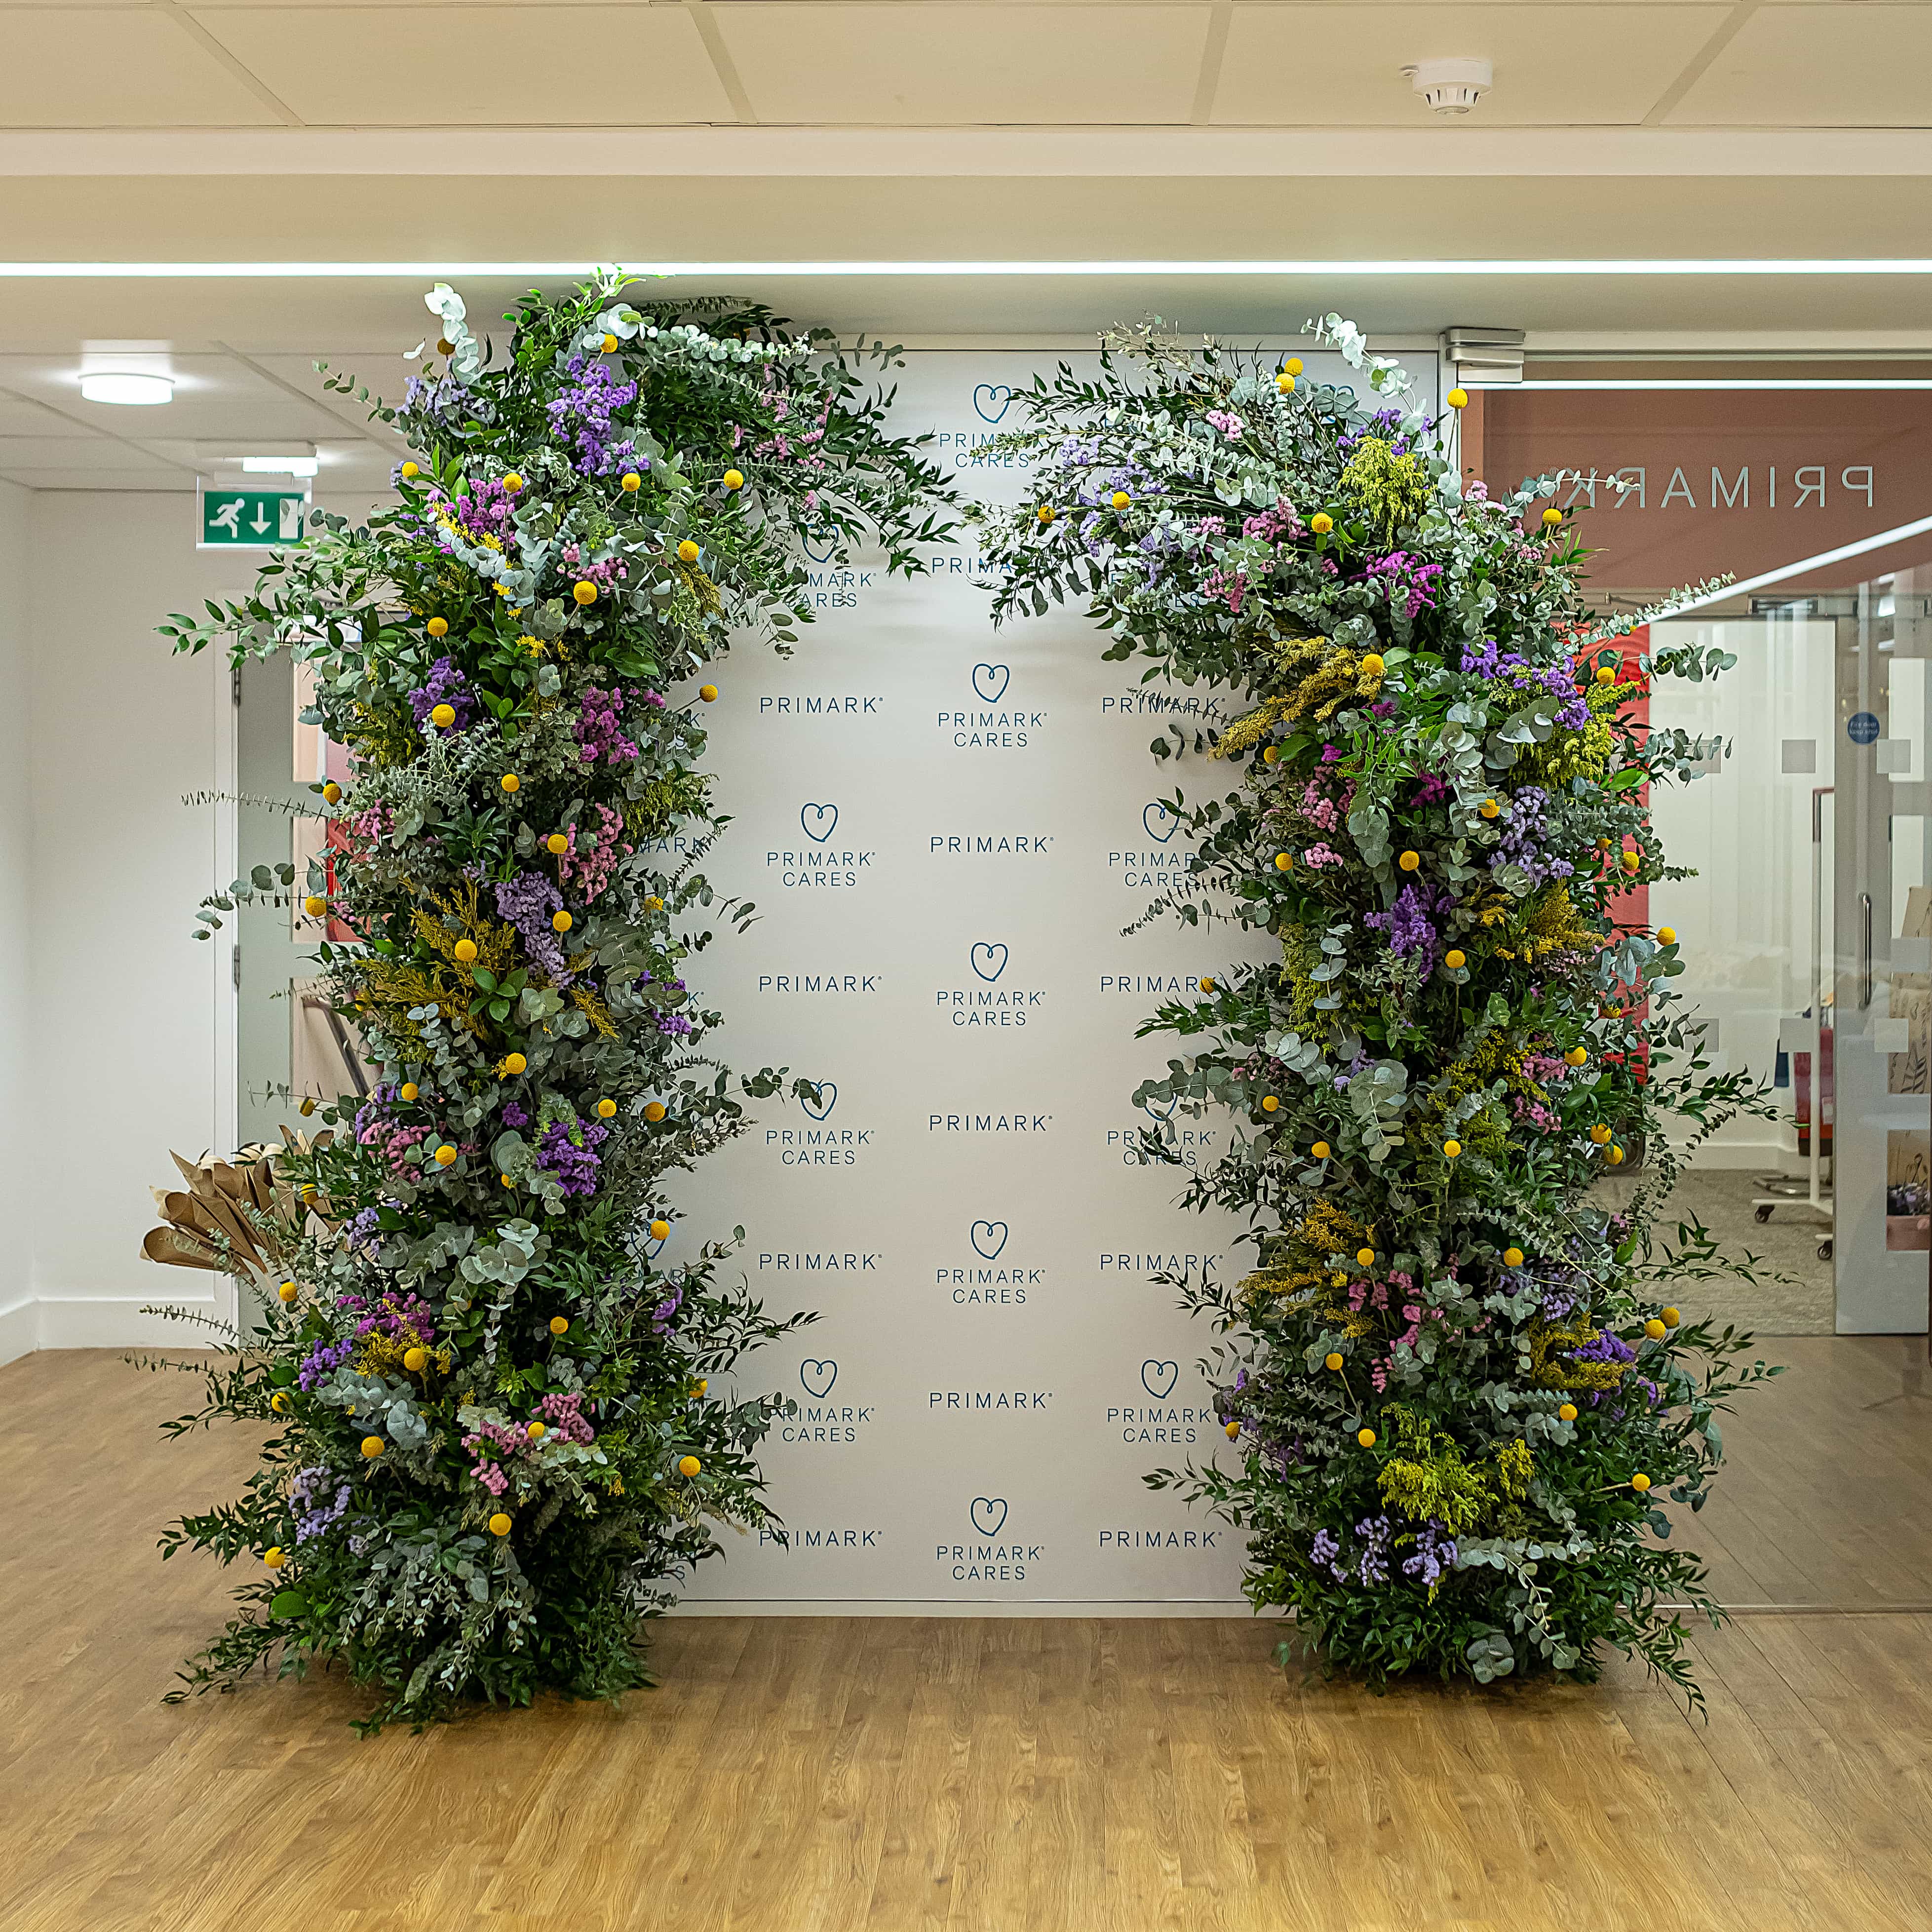 A bespoke floral arch created for Primark’s latest collection launch event, perfect for a wonderful picture moment.